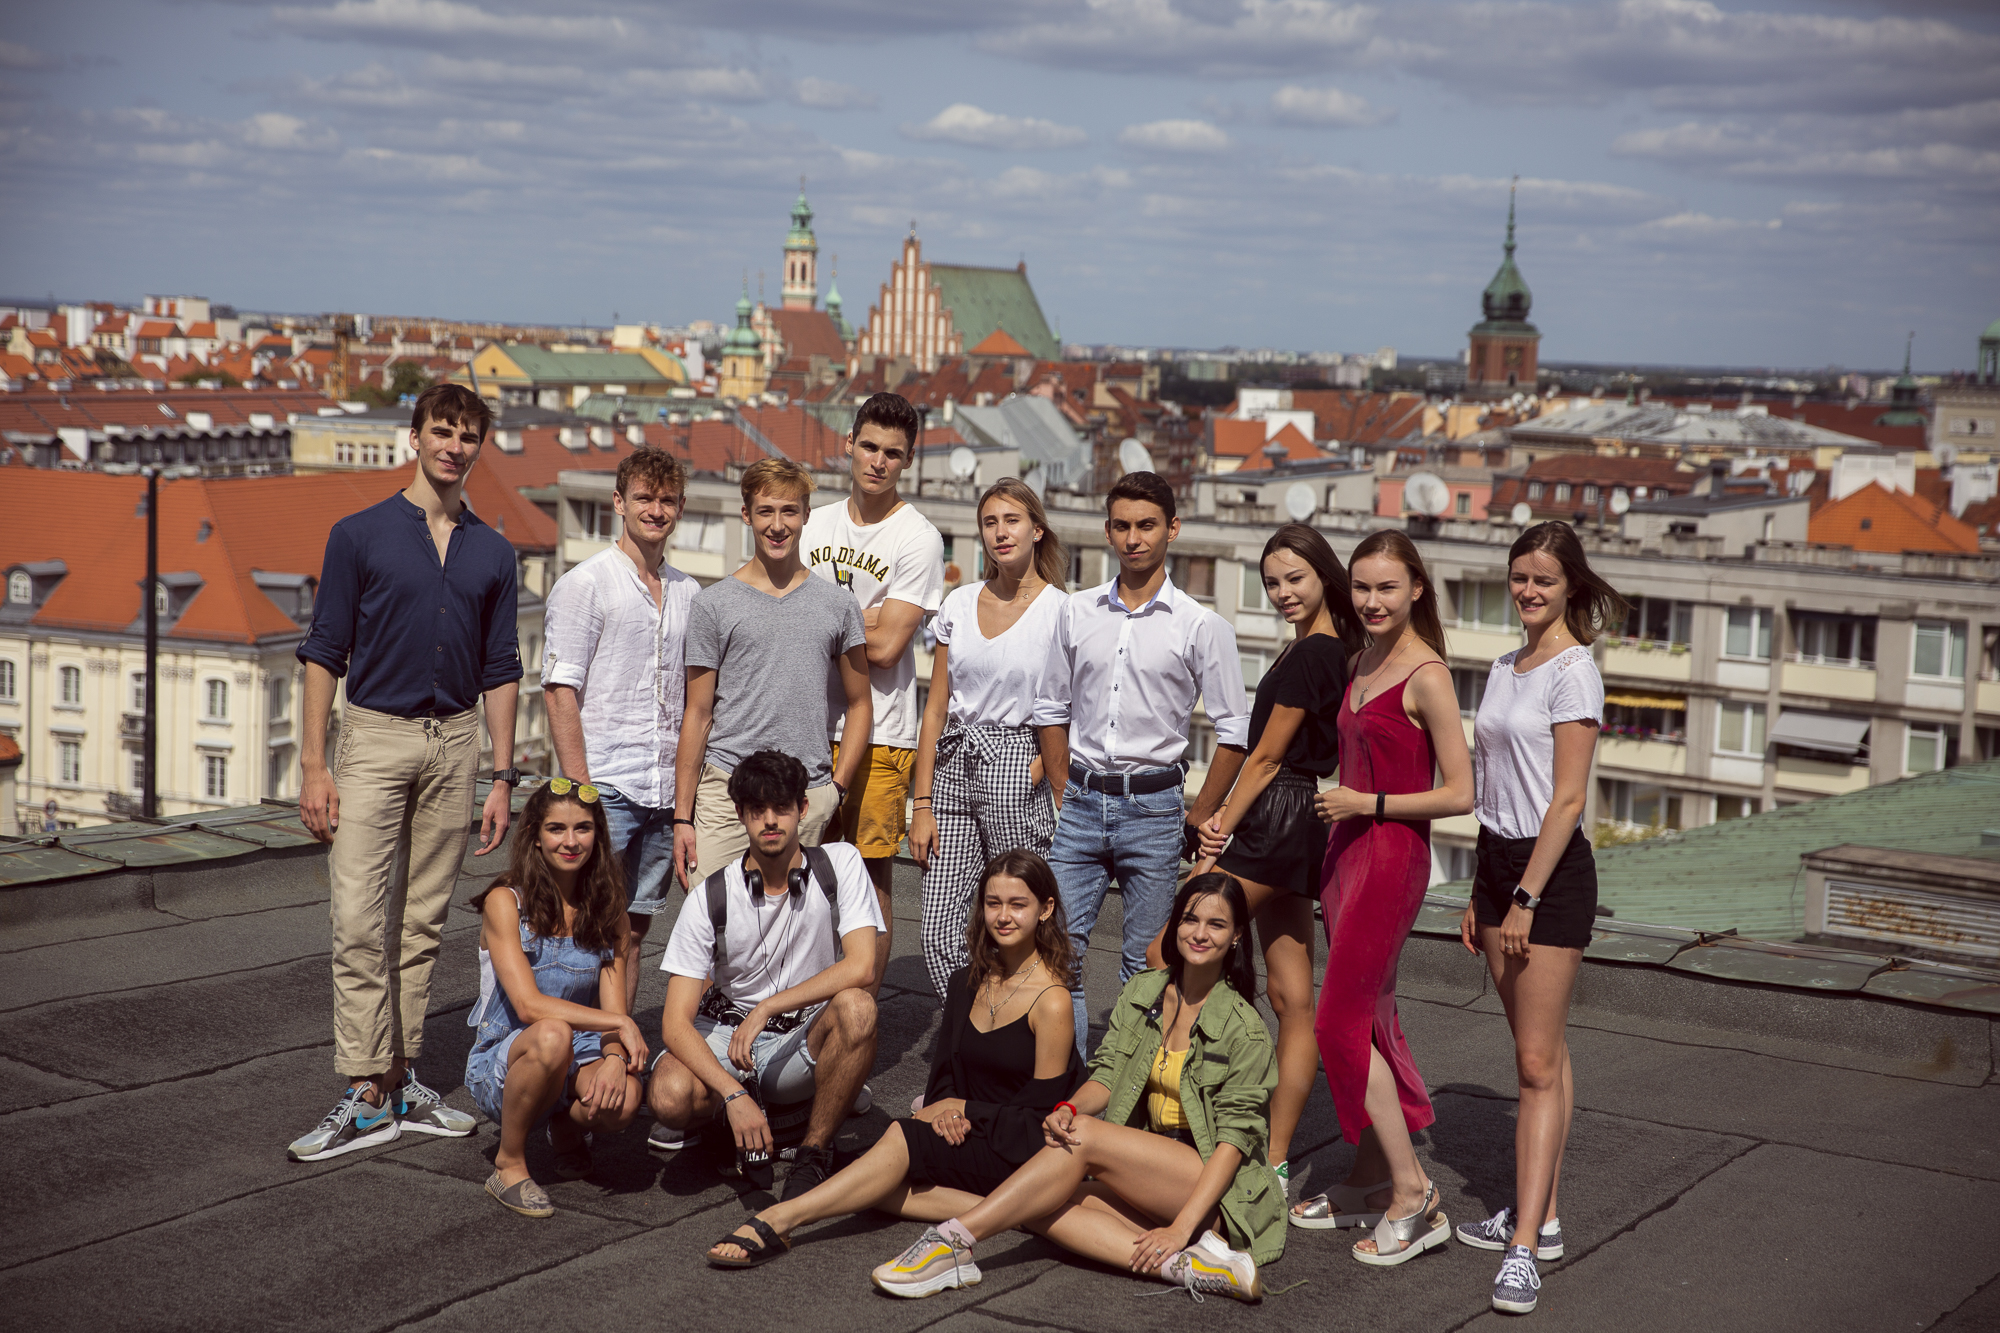 Group of young people standing on what seems like a balcony with the Warsaw city landscape in the background